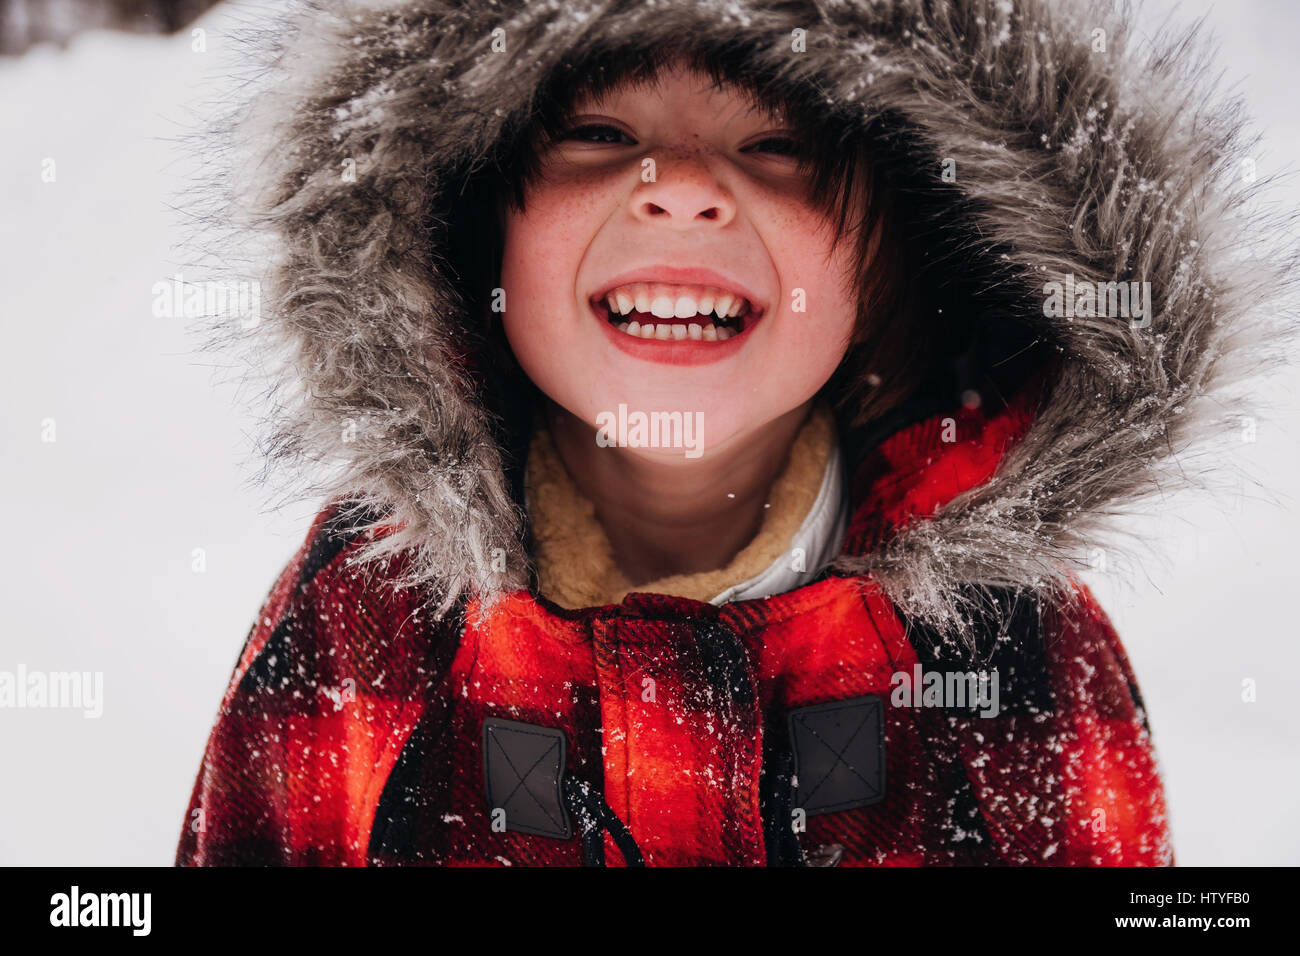 Portrait of a smiling girl in hooded parka Stock Photo